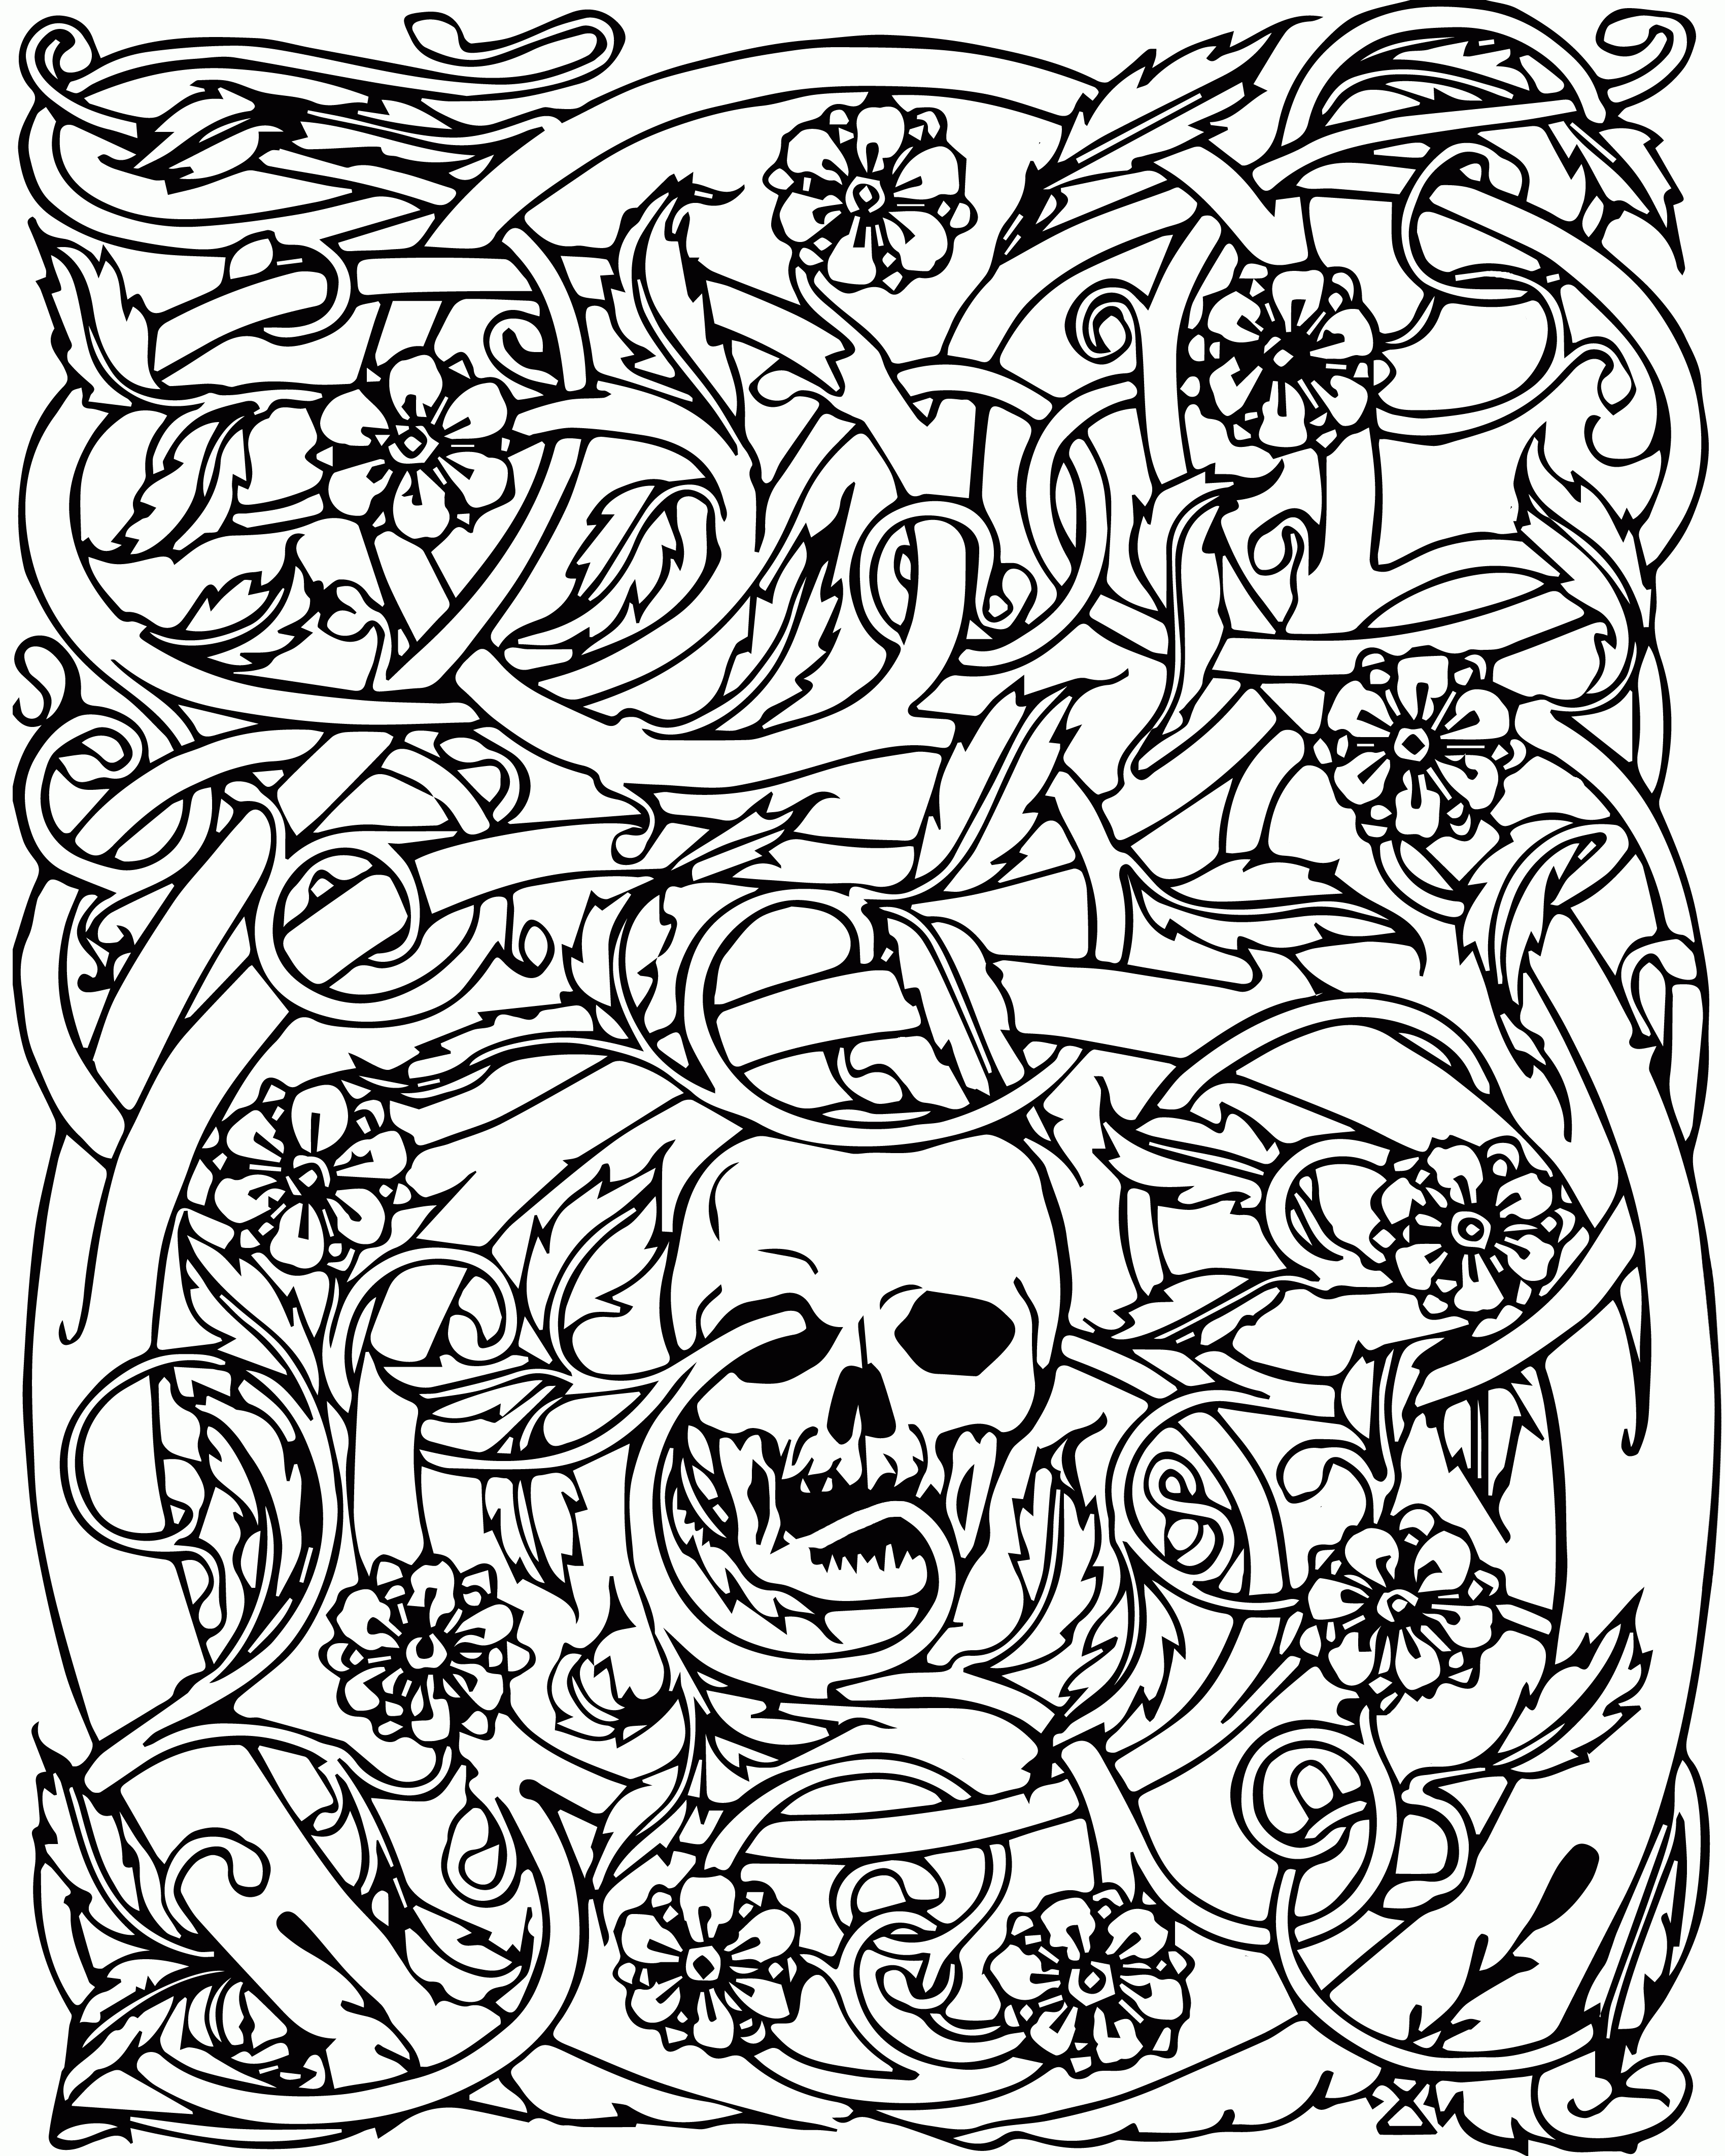 Cool Skull Design Coloring Pages - Coloring Home